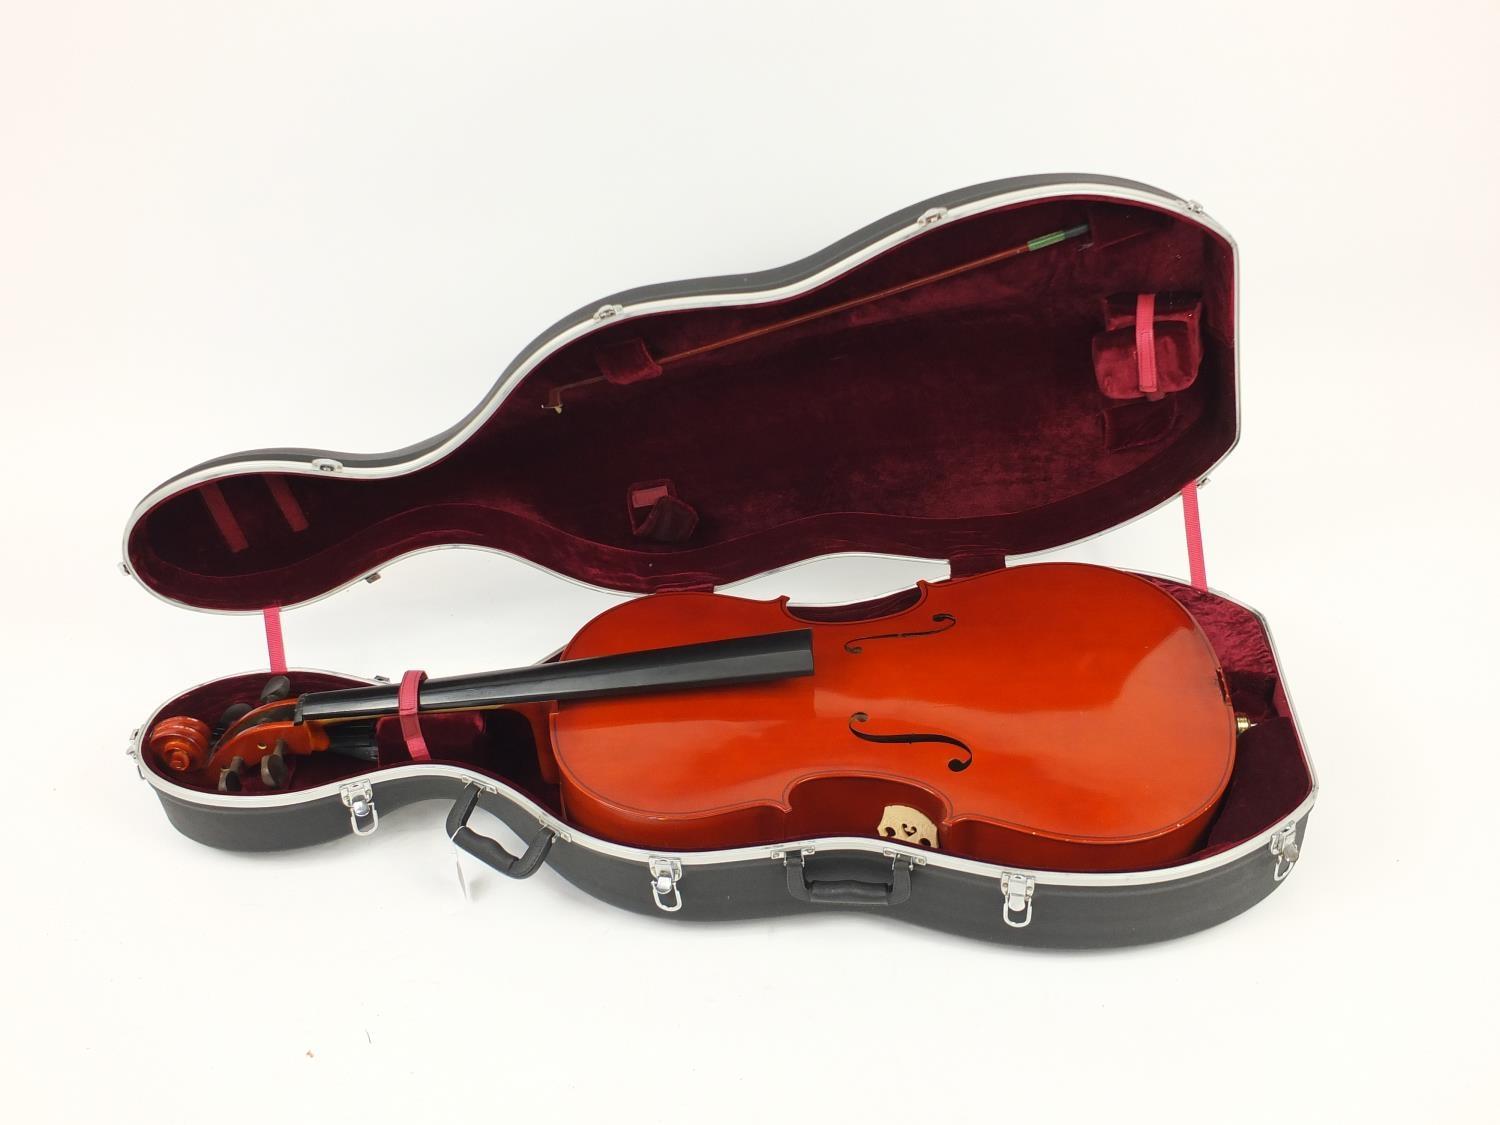 Full size cello with bow and Stagg protective travelling case, the cello back 30.5inch in length : - Image 15 of 19